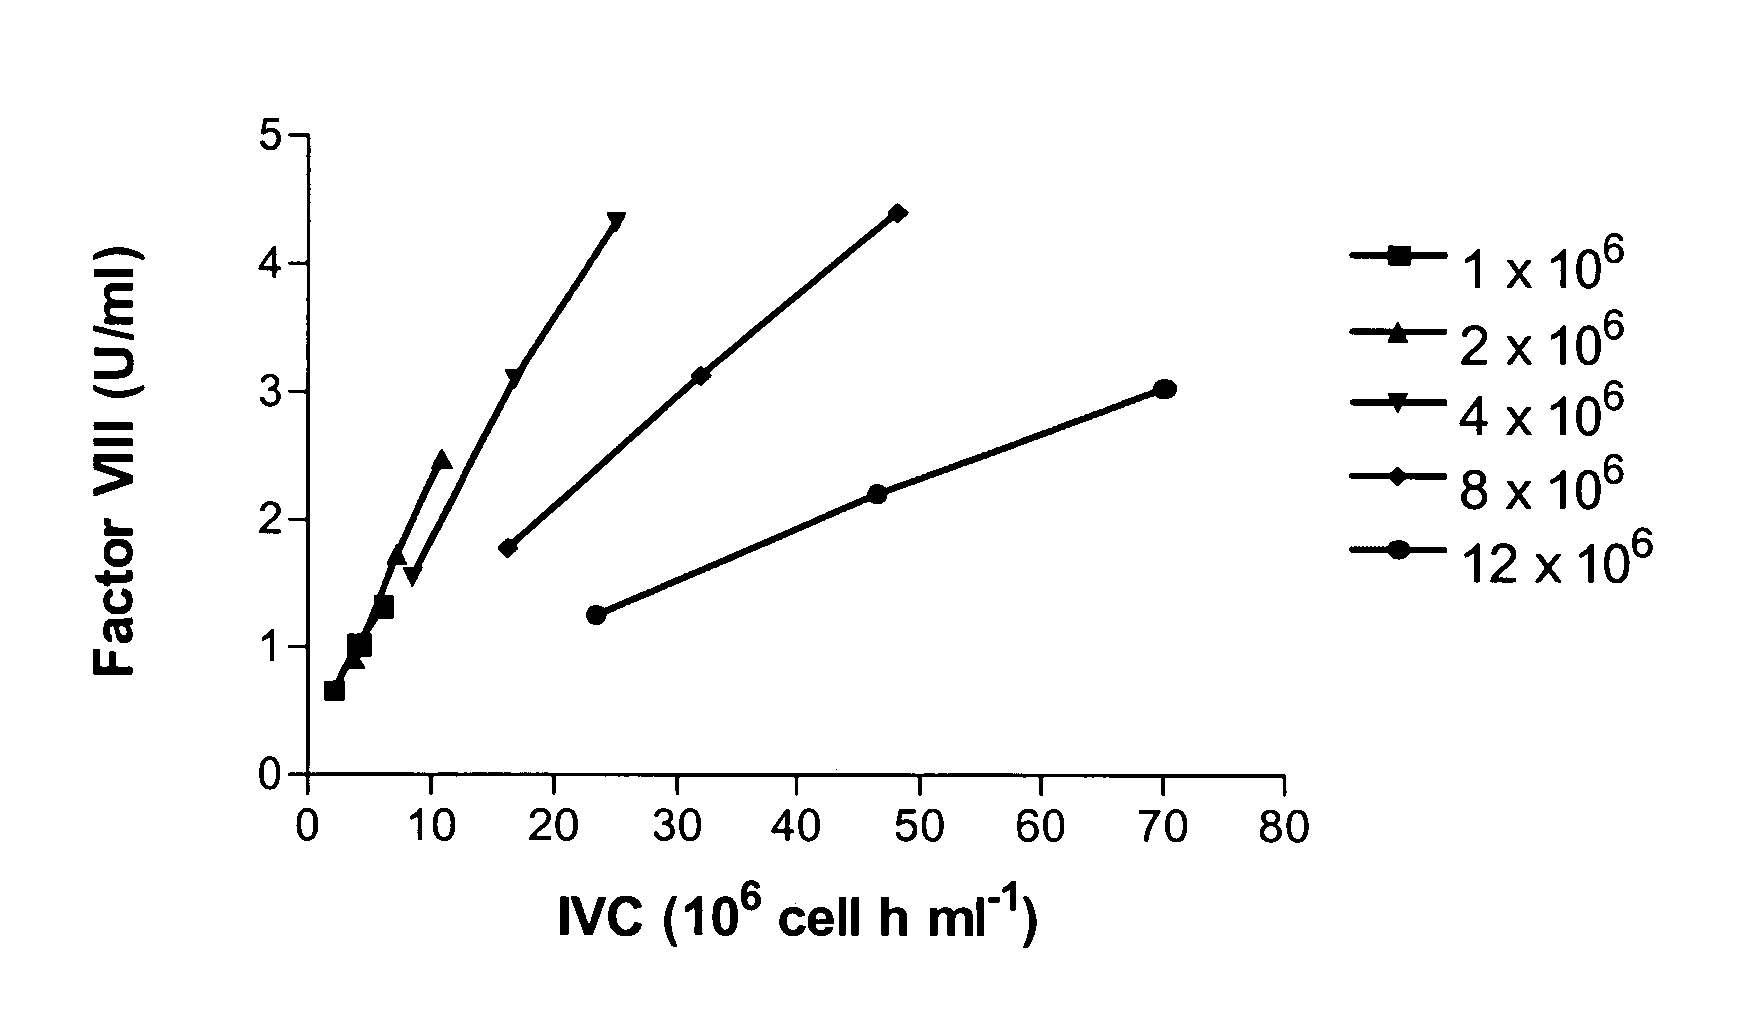 Recombinant expression of factor VIII in human cells